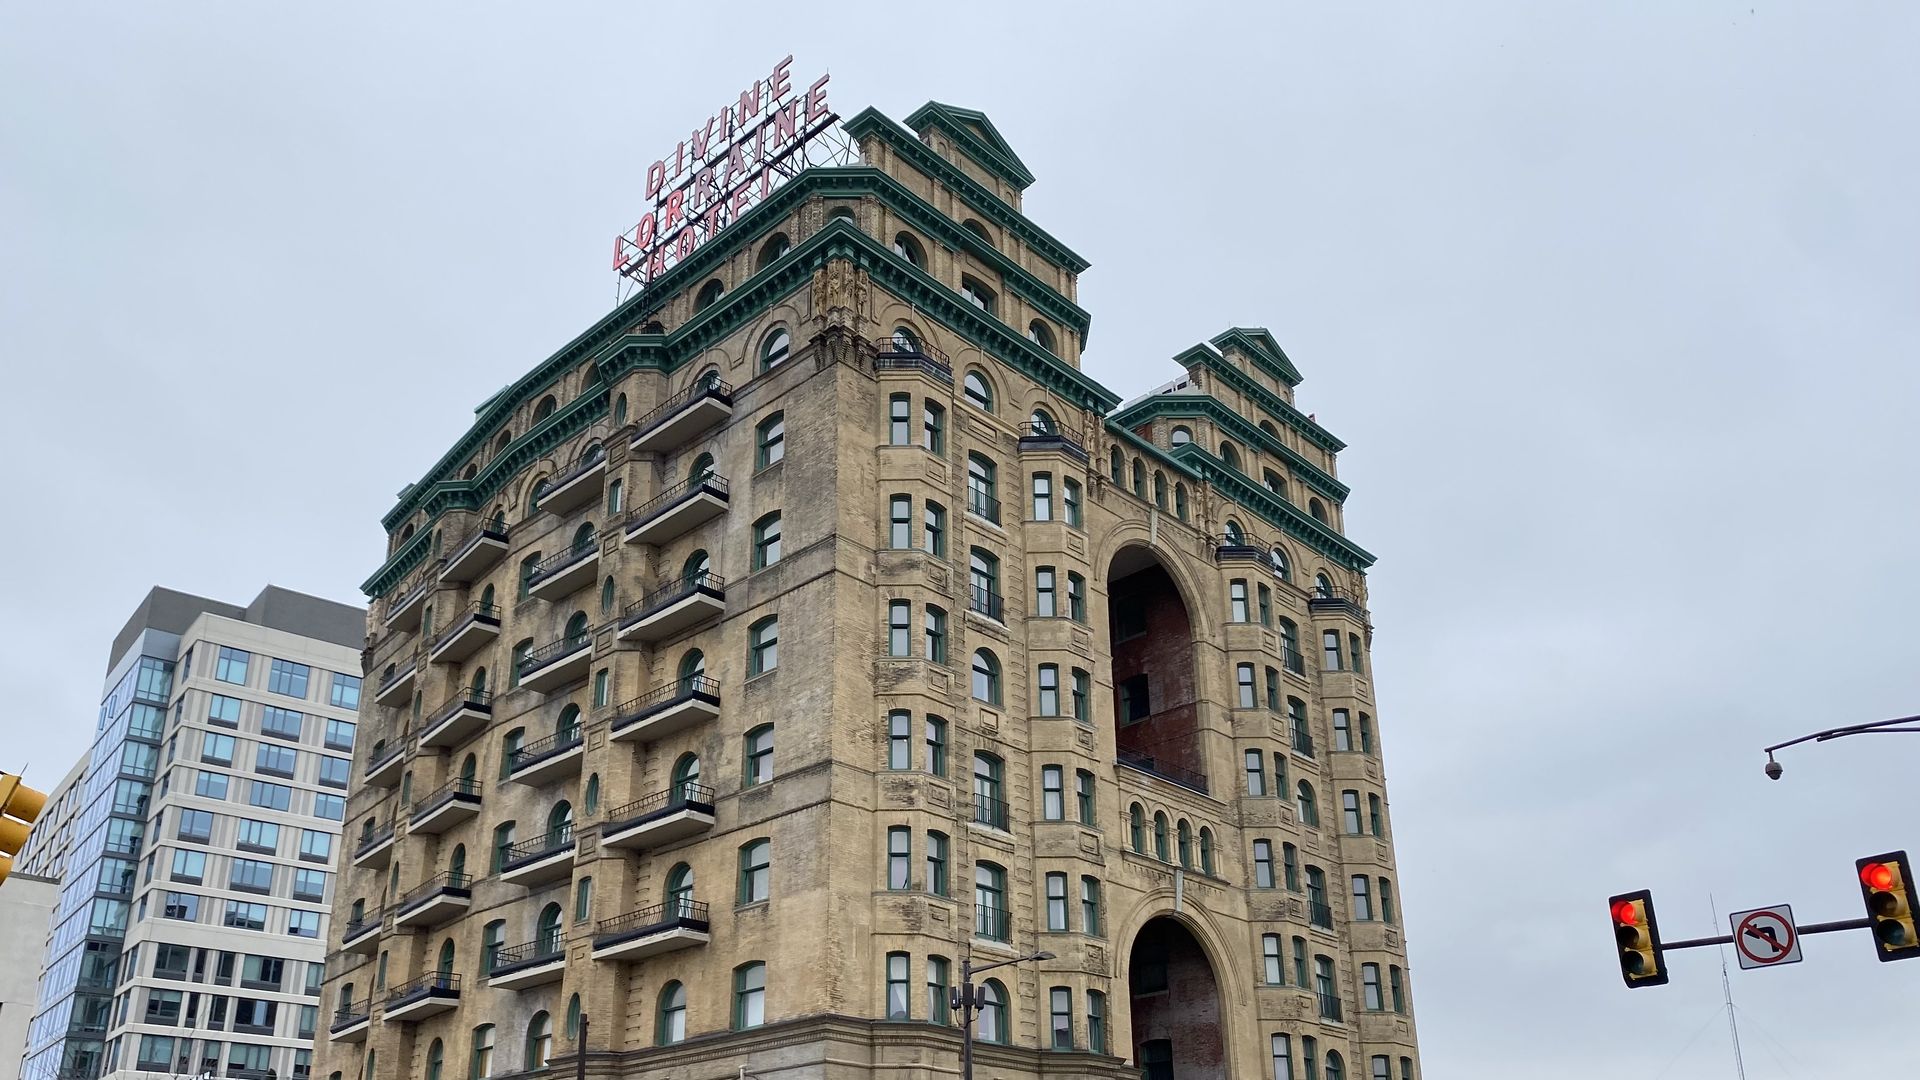 The Divine Lorraine Hotel at 699 N Broad St.